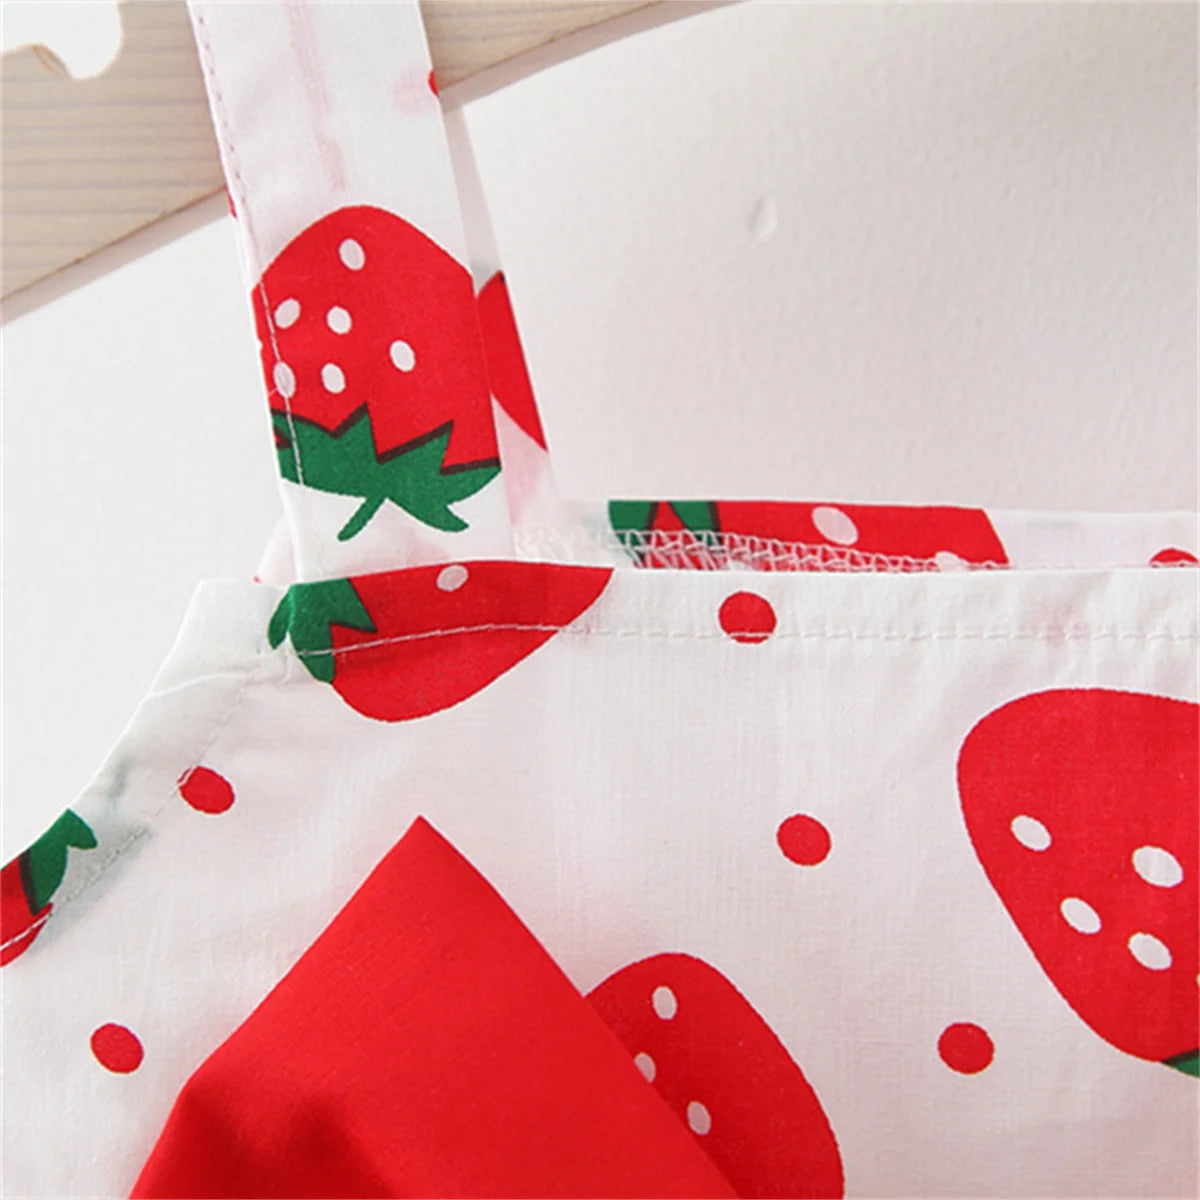 Babies Casual Dress Strawberry Print Chest Bow with hat Baby JT's Designer Fashion